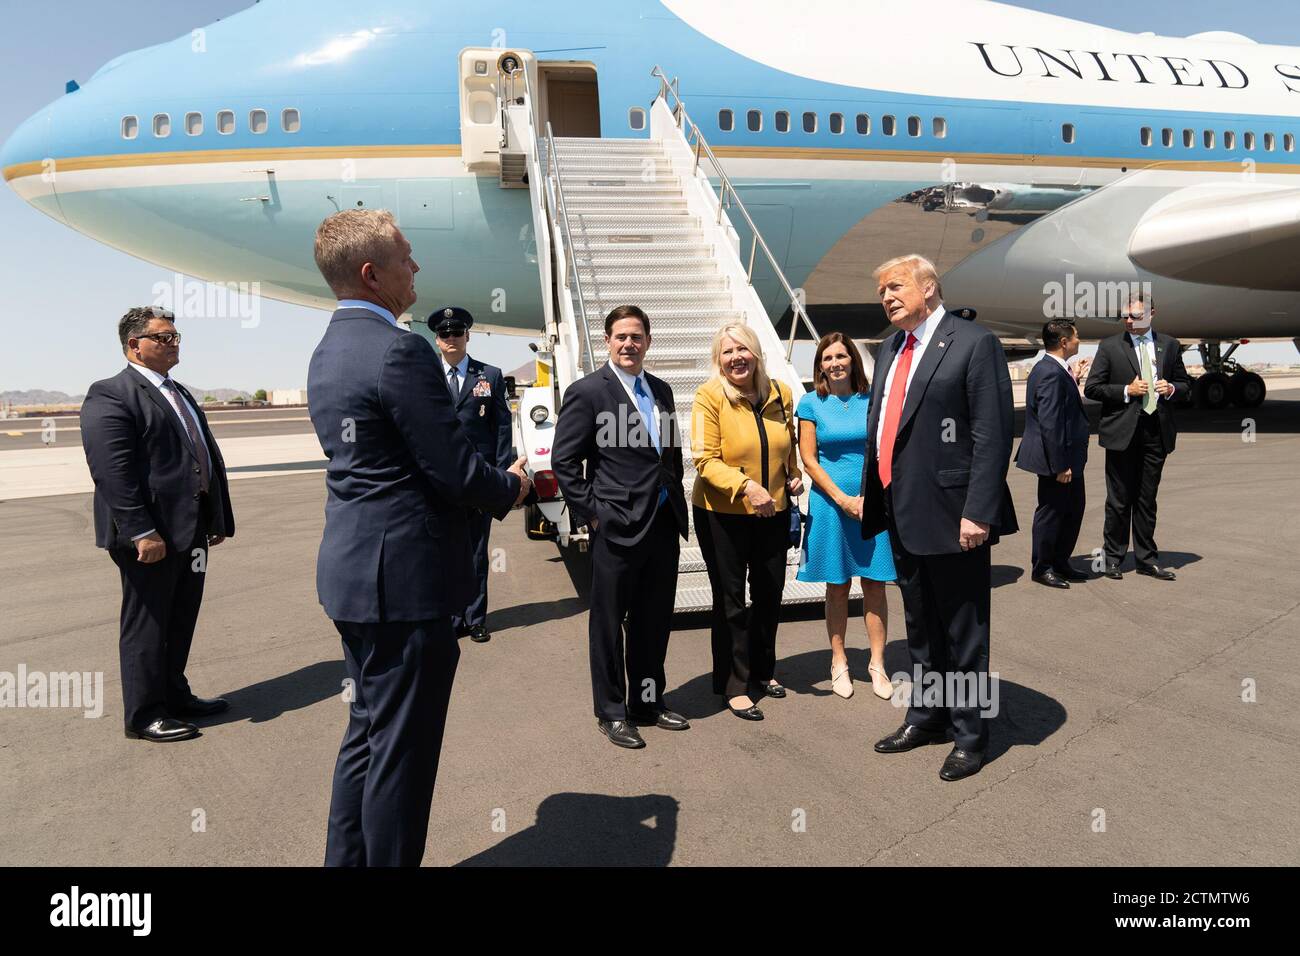 President Trump Travels to Arizona. President Donald J. Trump, joined by Arizona Governor Doug Ducey; Senator Martha McSally, R-AZ, and Rep. Debbie Lesko, R- AZ, is met by Clint Hickman Vice Chairman of Arizona’s 4th District on the Maricopa County Board of Supervisors upon the President’s arrival Tuesday June 23, 2020, at Phoenix Sky Harbor International Airport in Phoenix. Stock Photo